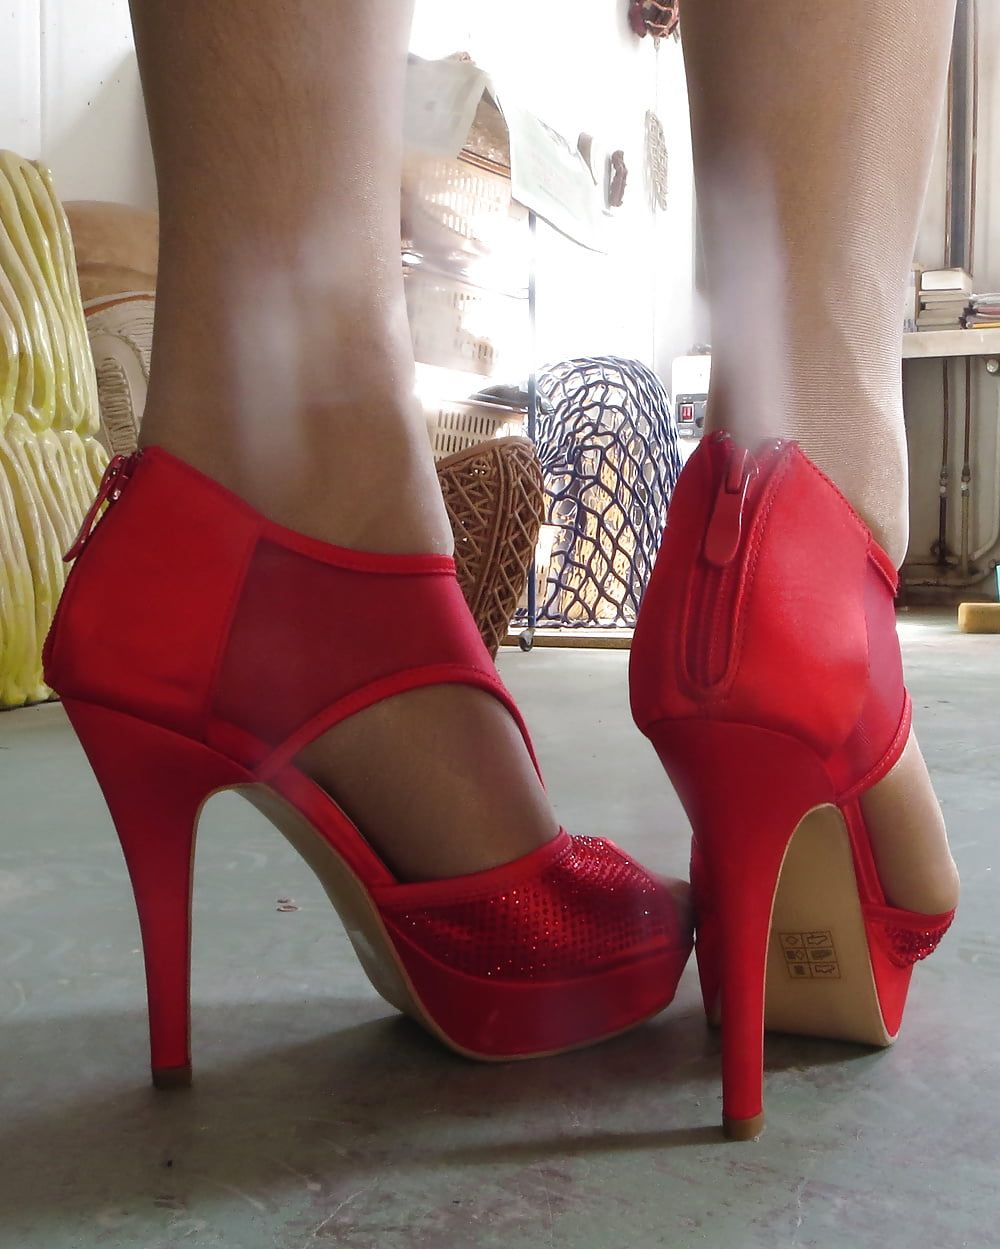 pantyhose and red pumps of my wife size 39, squeezed into #21